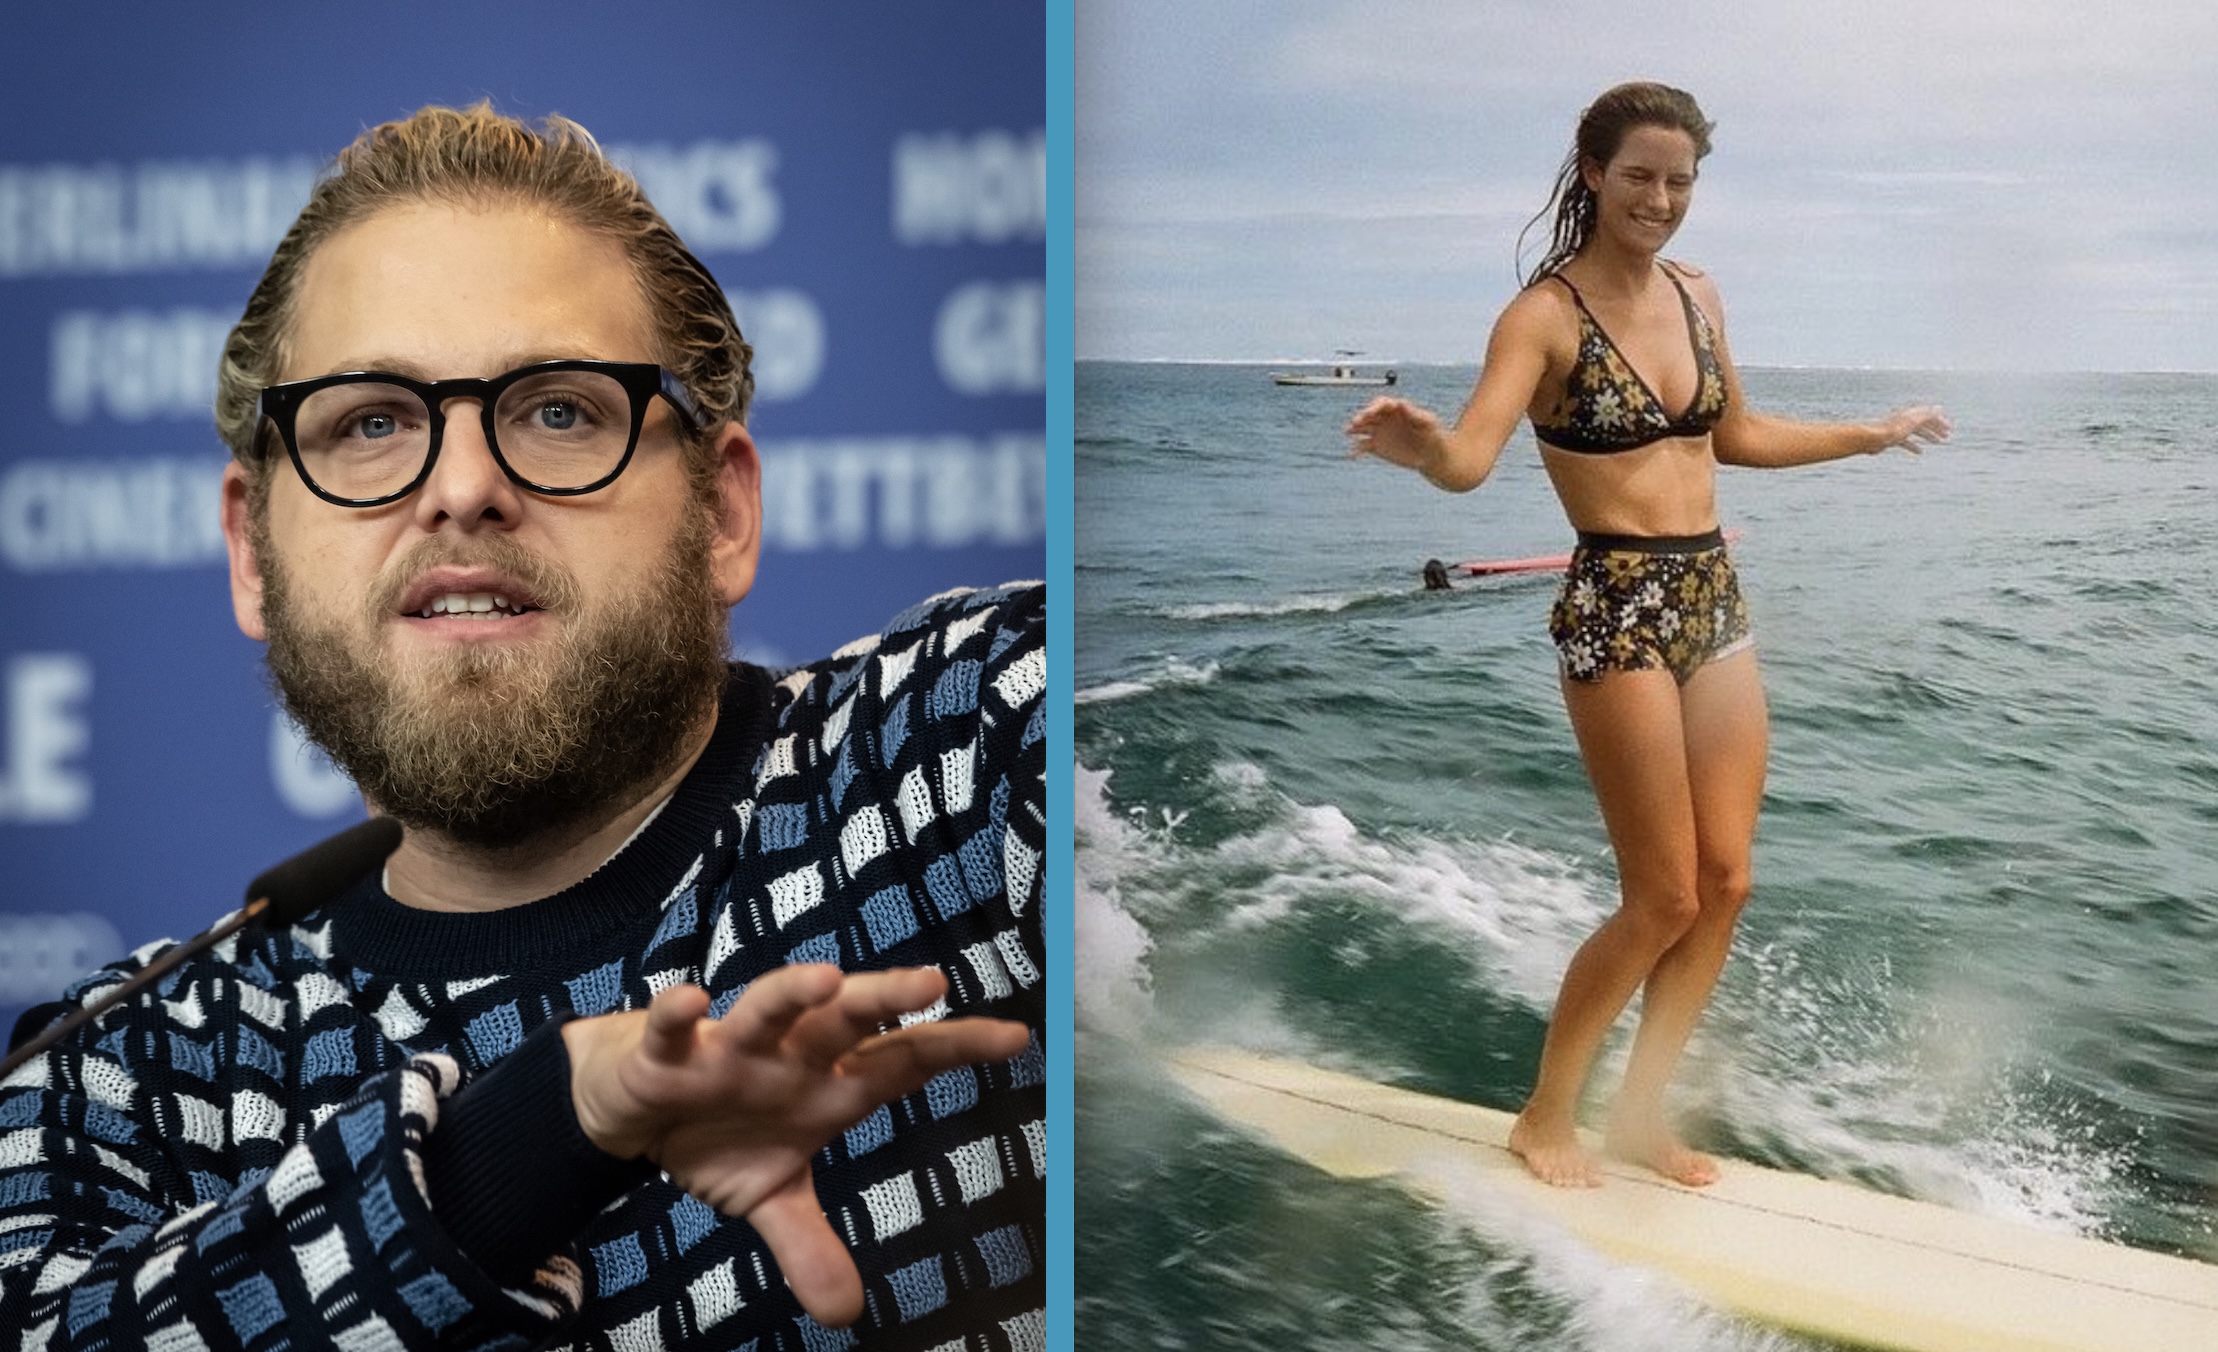 Viral Texts From Jonah Hill To His Ex-Girlfriend Forbids Her From Surfing With Men